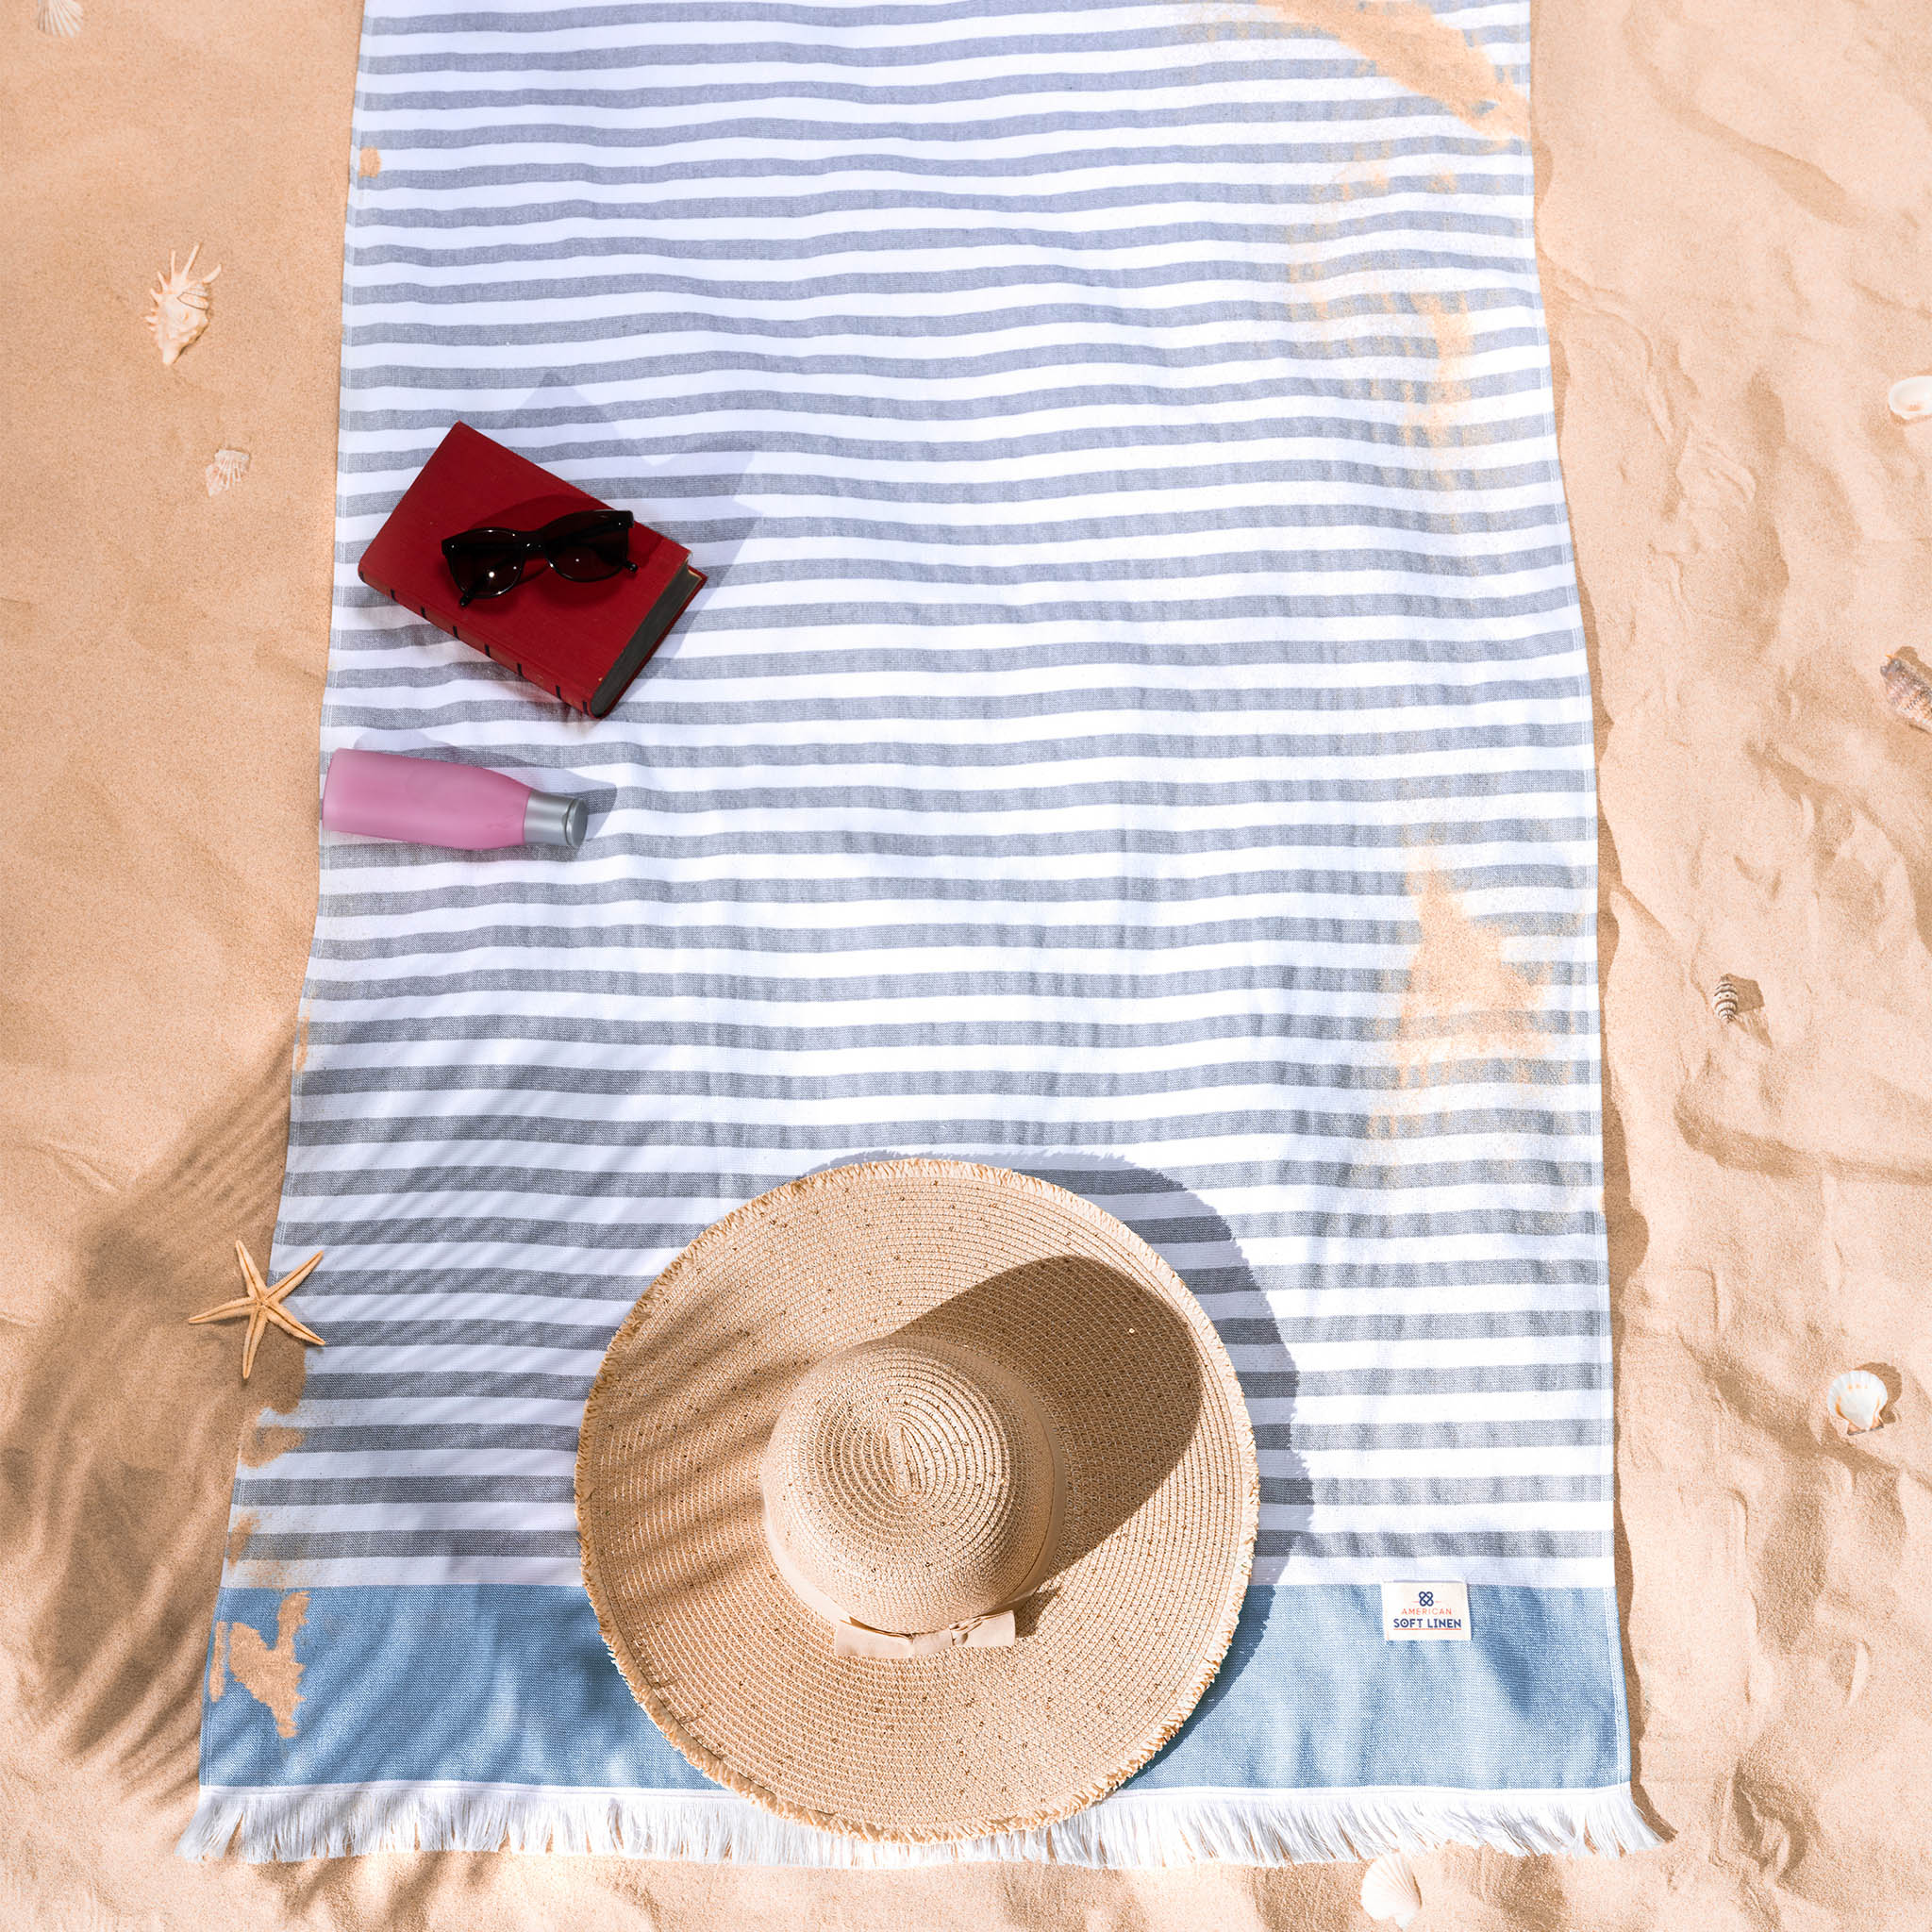 American Soft Linen, Peshtemal Beach Towel, 100% Cotton 35 in 60 in  Oversized Swim Towels, Soft Absorbent Light Weight Quick Dry Pool Towels,  Sky Blue